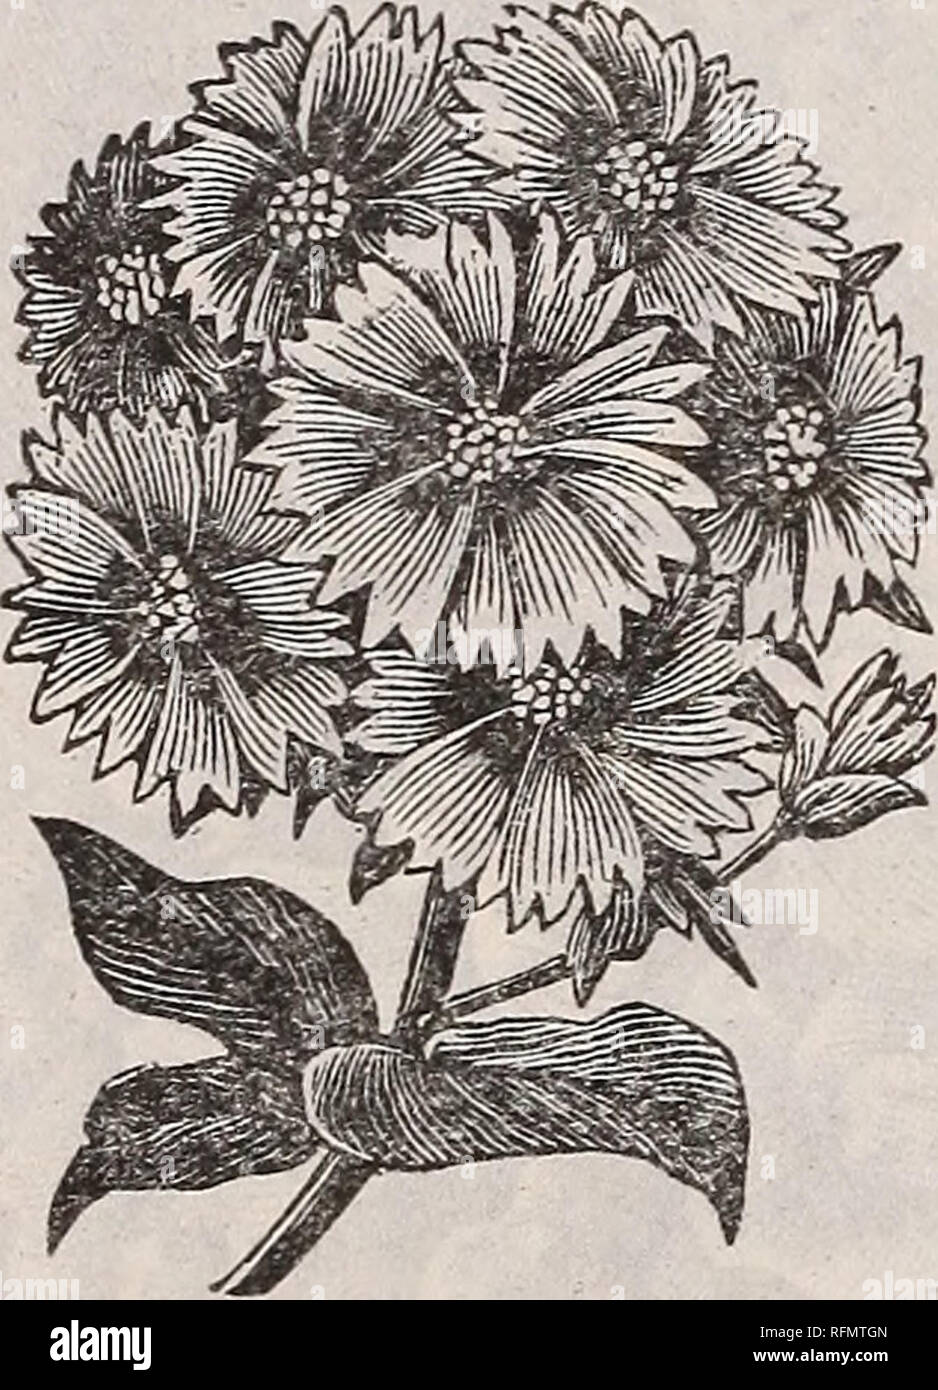 . Flowers for spring, 1899 : plants seeds and bulbs. Nursery stock New York (State) Catalogs; Flowers Seeds Catalogs; Bulbs (Plants) Catalogs; Plants, Ornamental Catalogs. GIANT* PHLOX DRUMMONDIGRANDIFLORA. For beds or borders of dazzling beauty nothing equals the Phlox. Sown out- side, they bloom very soon after plant- ing and until frost. My Giant Phlox Mixture contains more than 40 kinds and colors of the best and most im. proved sorts. Lavender, scarlet, violet, white star, and fringed. Pkt. (100 seeds) 5 cts, %-oz. of this mixture, 10 cts. Phlox Fimbriata. t This beautiful Phlox has fring Stock Photo